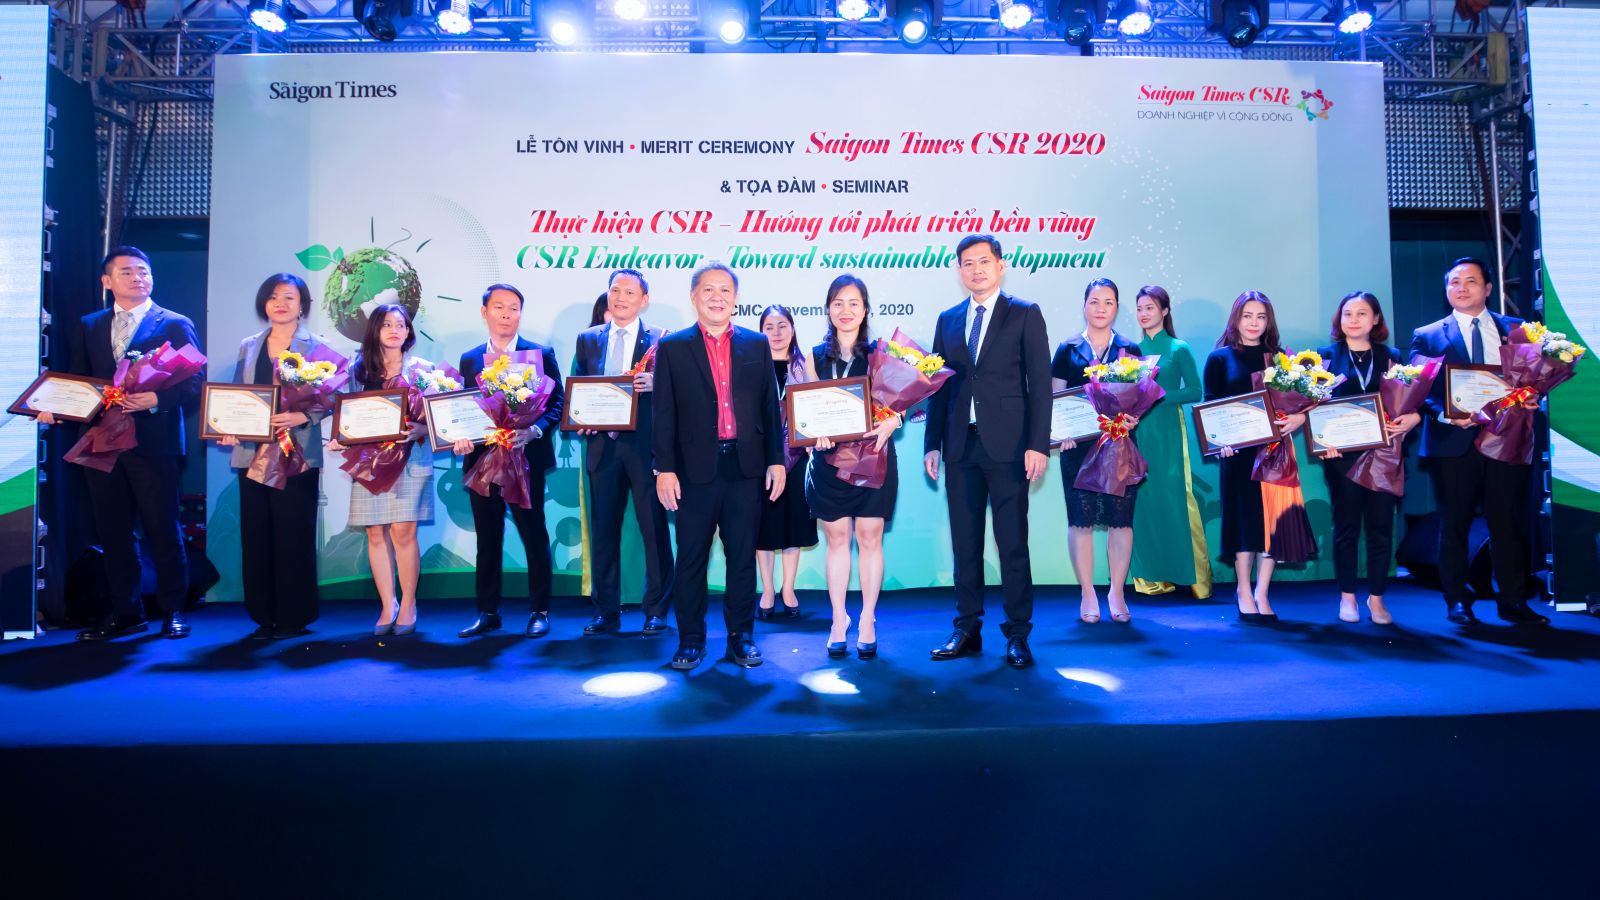 SonKim Land's Sustainable Village Project honored at Saigon Times CSR merit ceremony